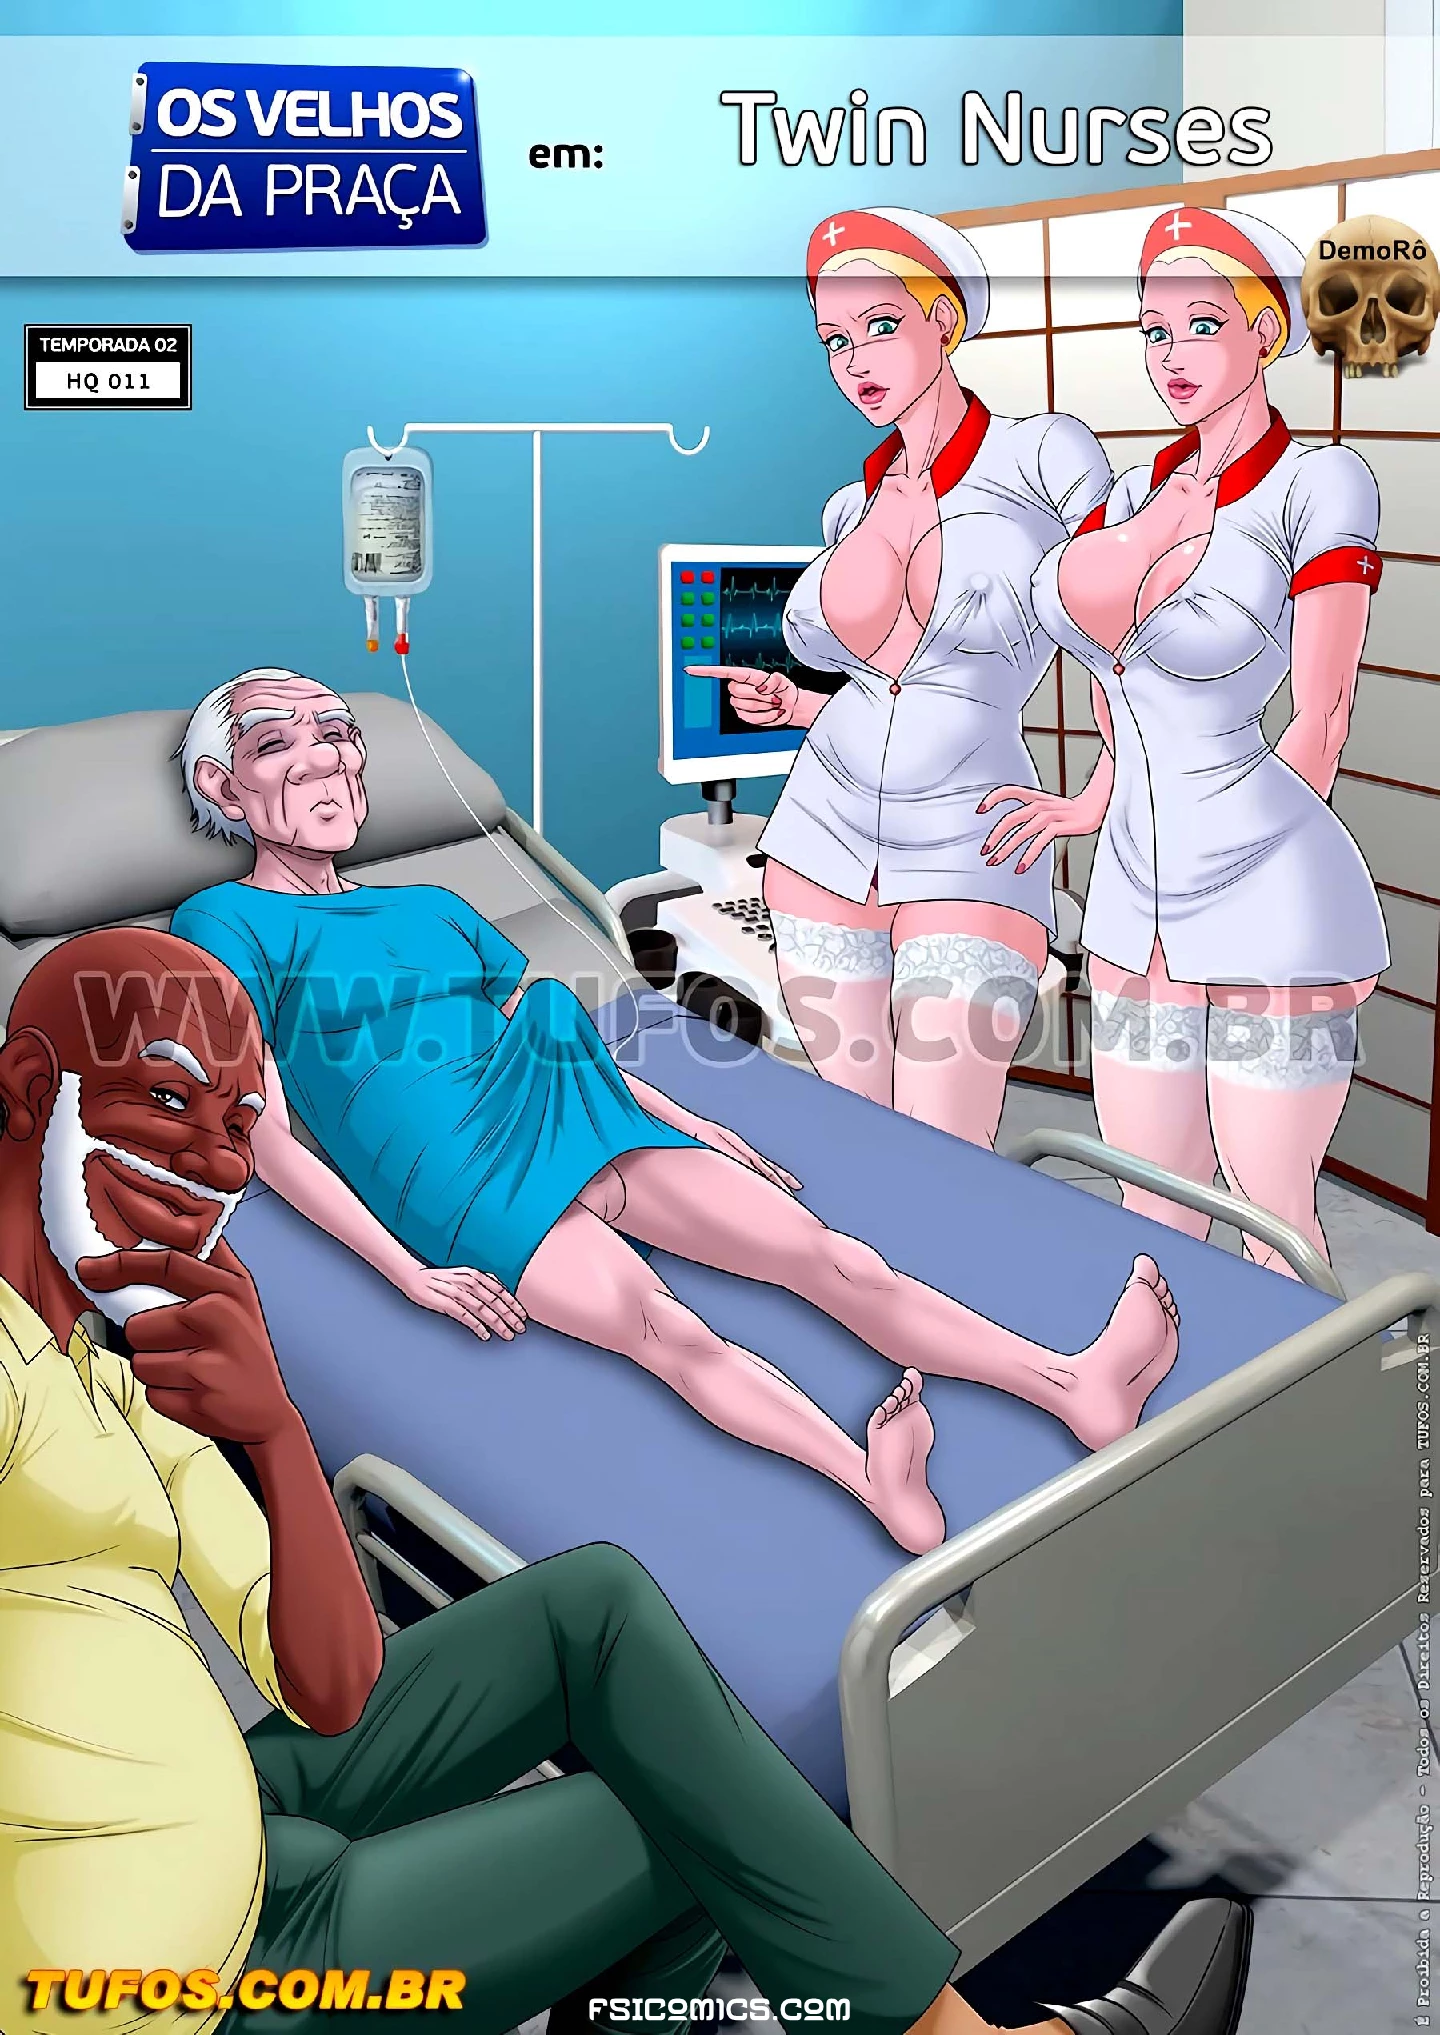 Old Geezers Of The Park Chapter 11 – Twin Nurses – Wc Tf - 69 - Fsicomics